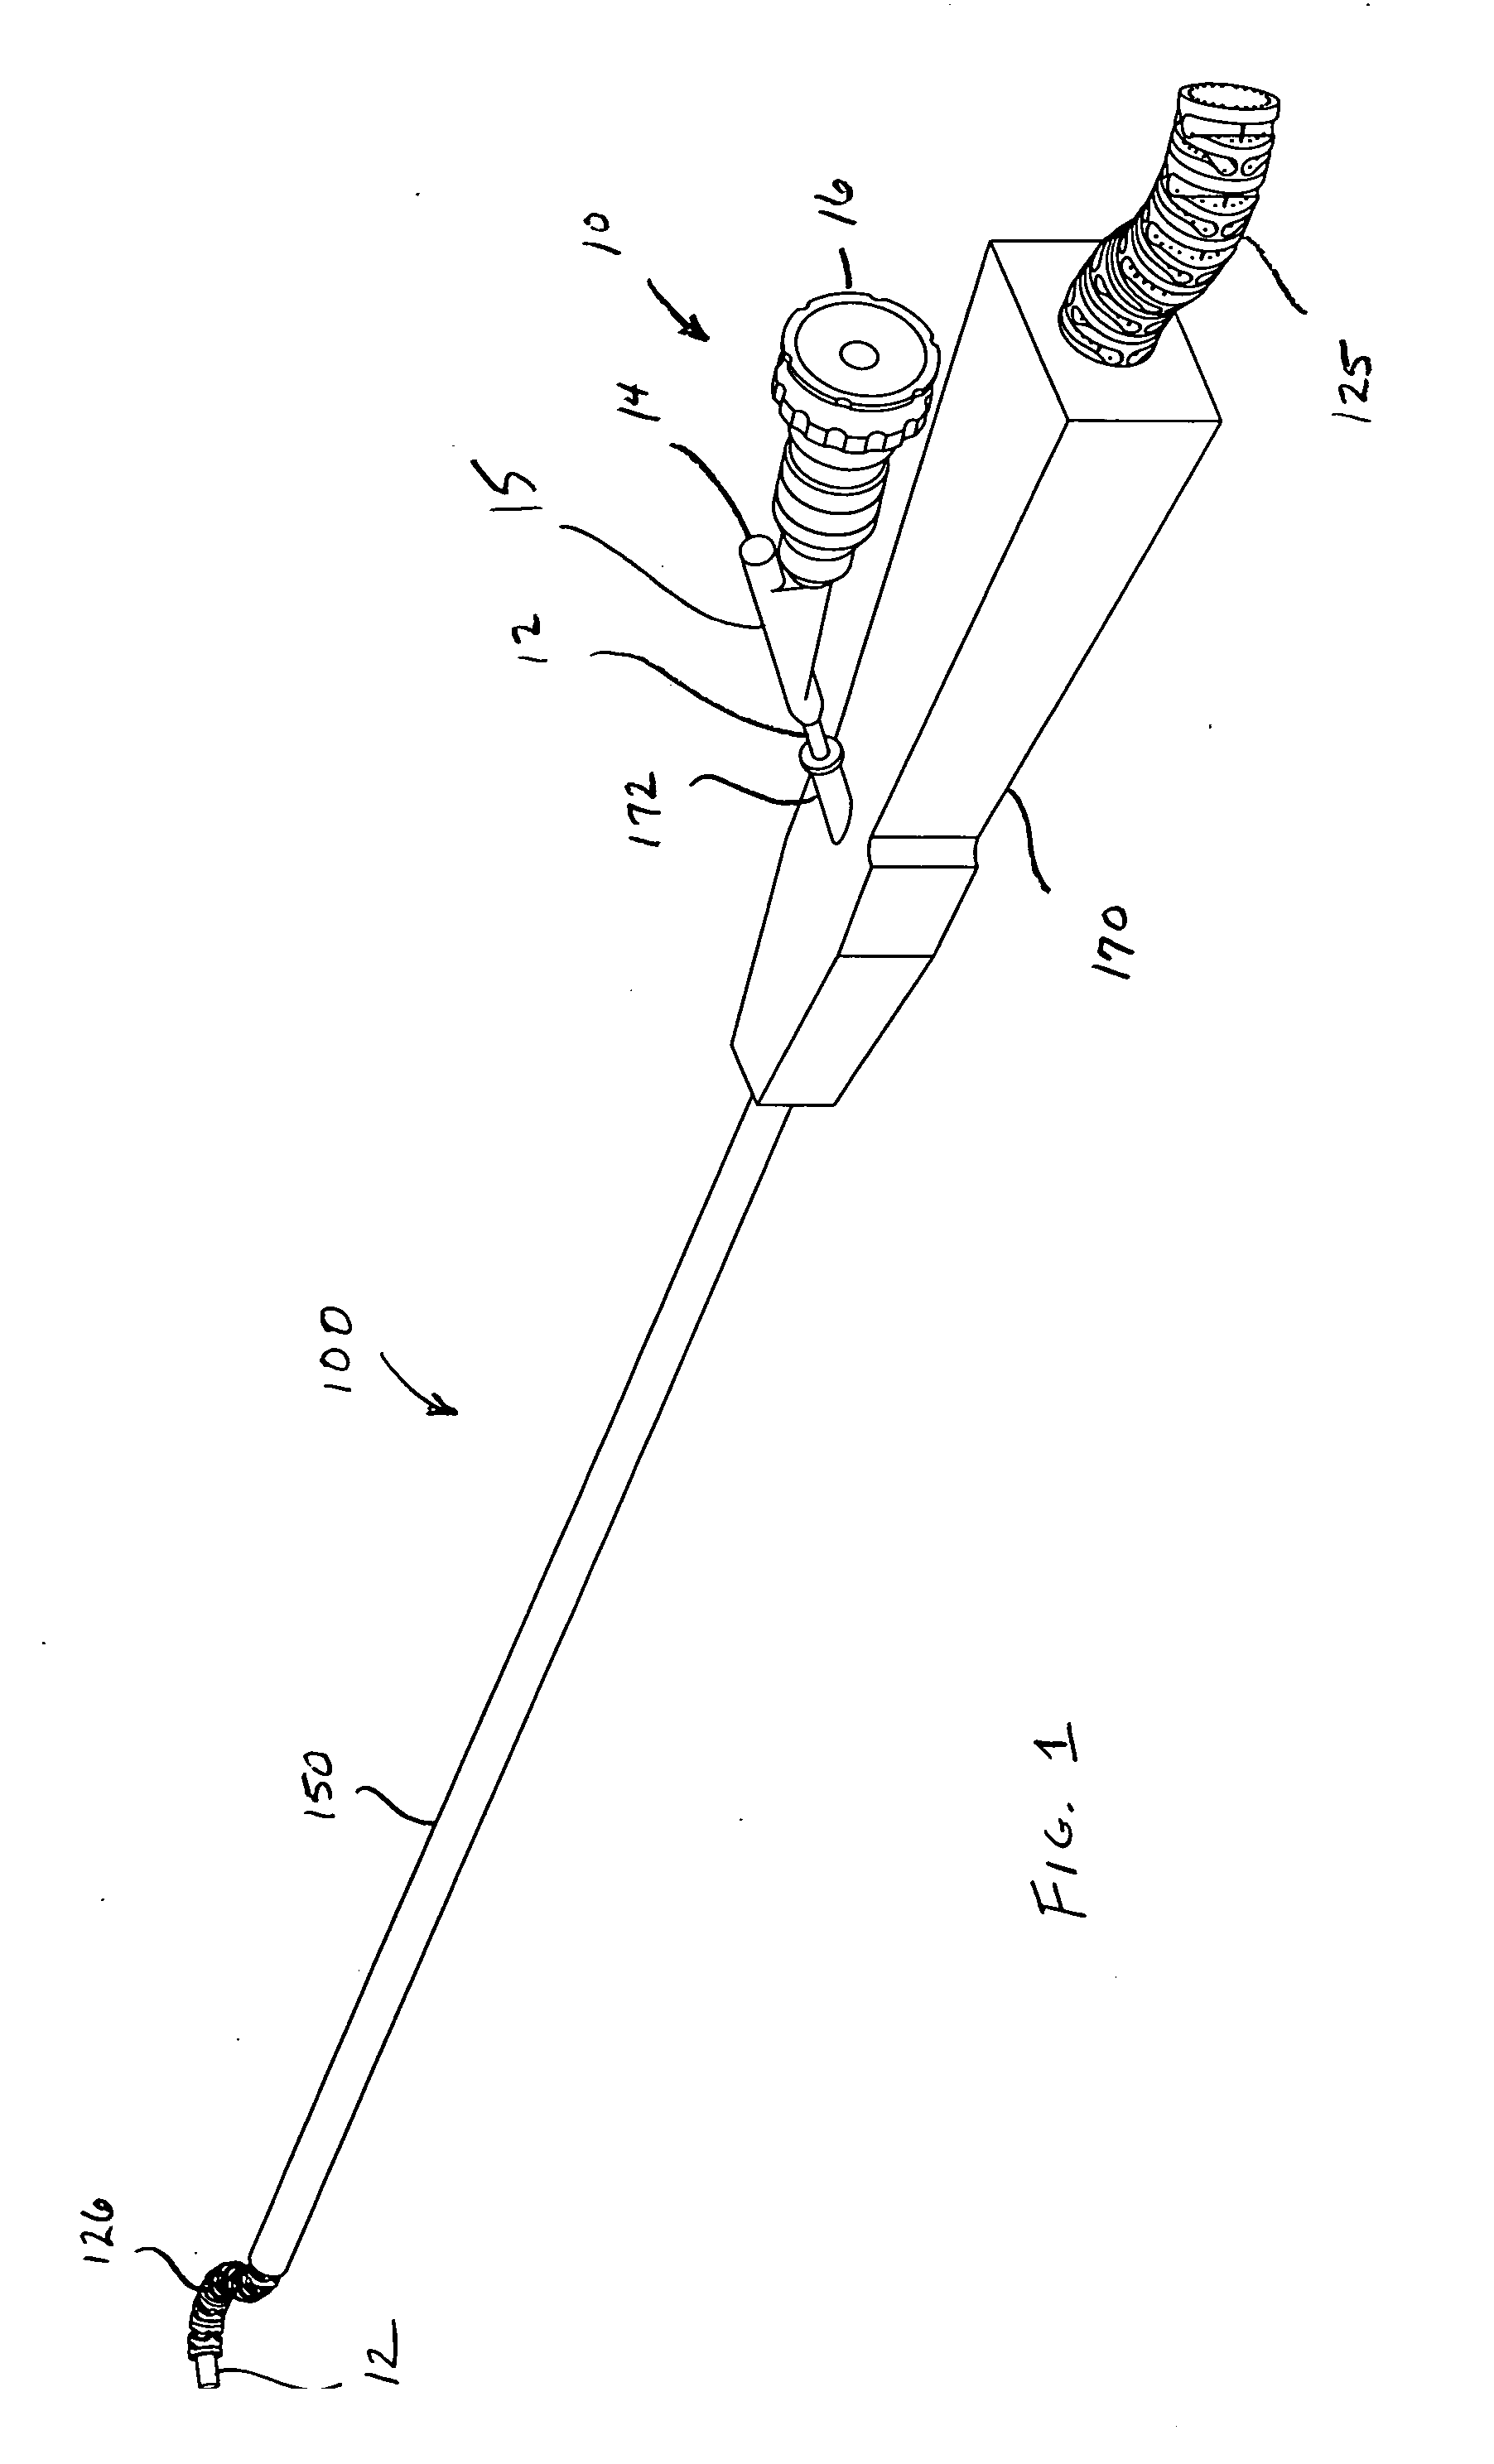 Articulating sheath for flexible instruments